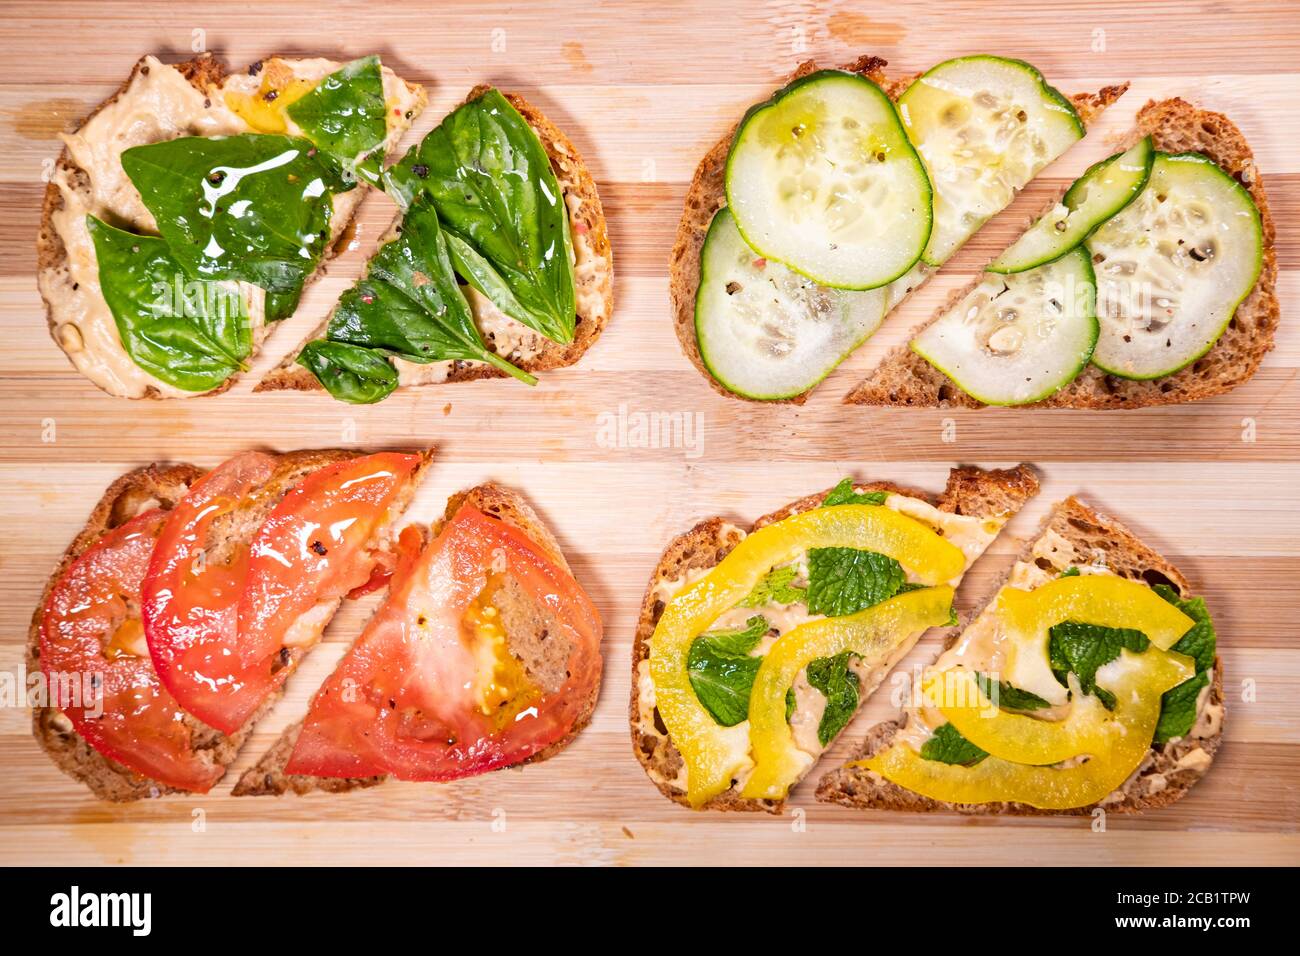 Plant based snadwiches on a cutting board, top view. Vegan lunch, vegetarian snacks, healthy food option Stock Photo